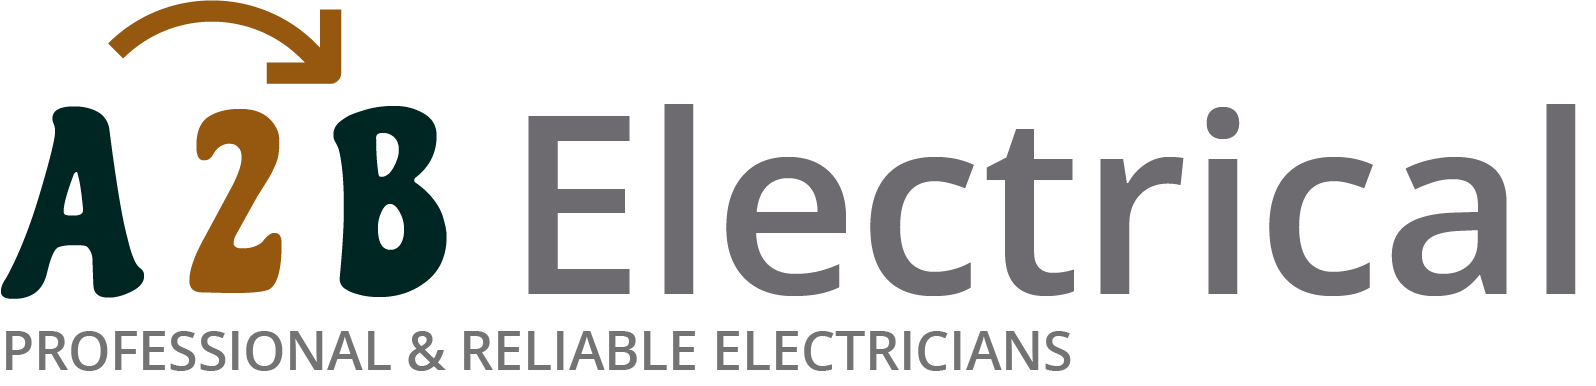 If you have electrical wiring problems in Thurrock, we can provide an electrician to have a look for you. 